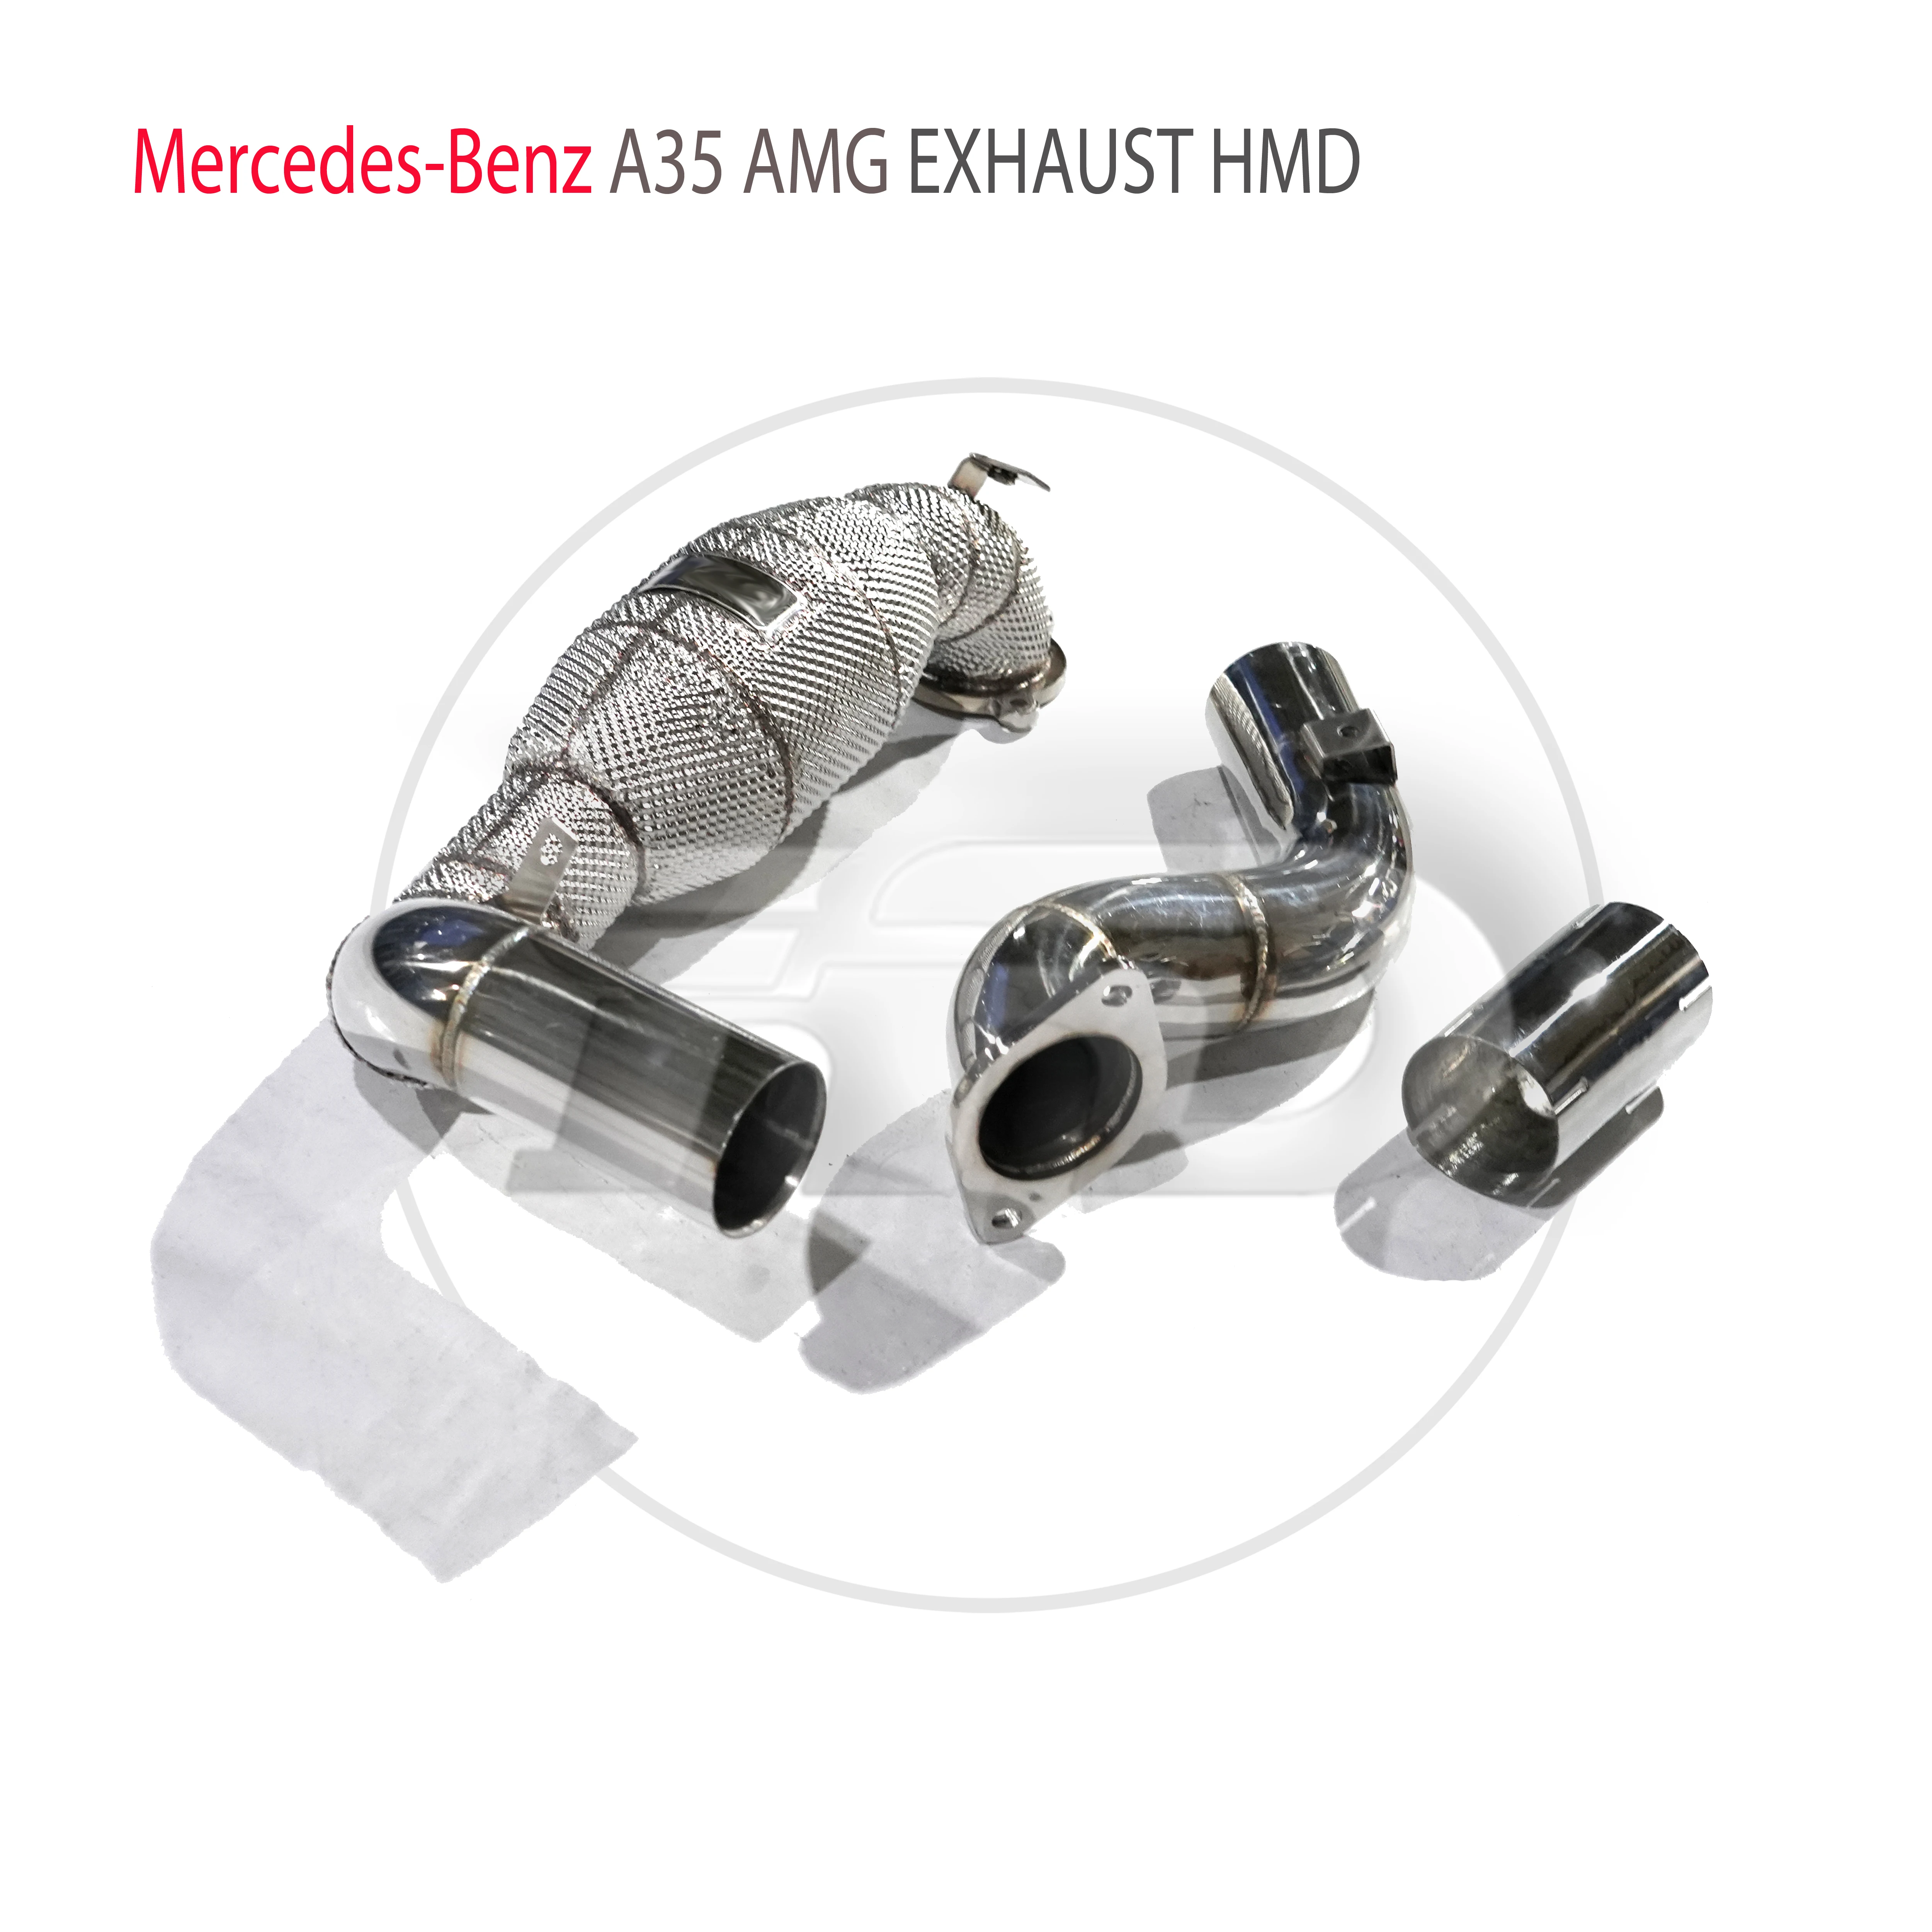 

HMD Exhaust System High Flow Performance Downpipe for Mercedes Benz A35 AMG W177 Car Accessories With Catalytic Header